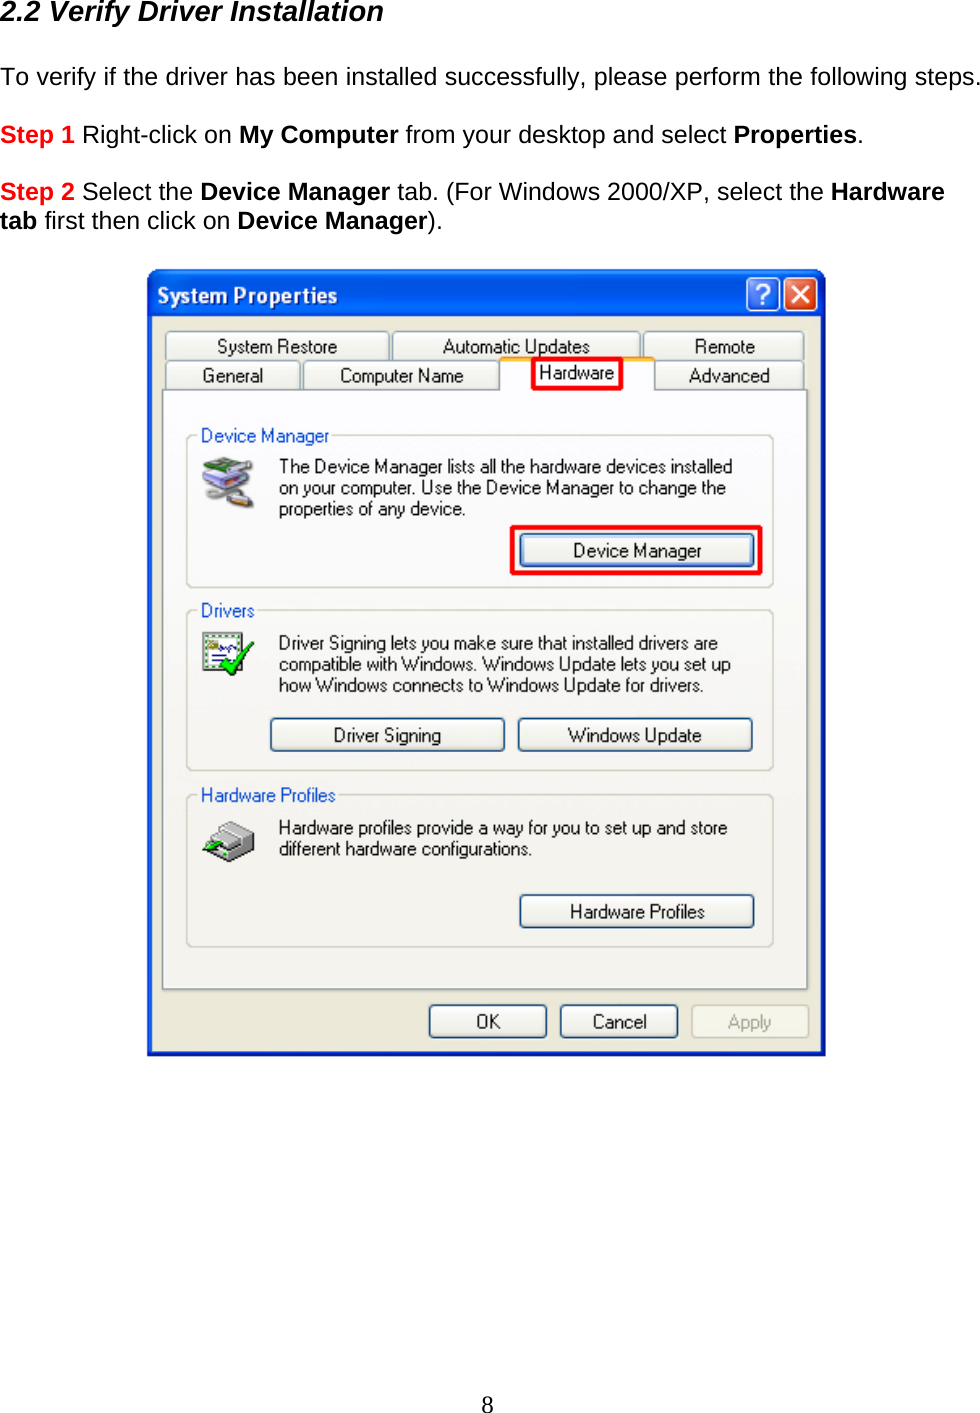 8 2.2 Verify Driver Installation  To verify if the driver has been installed successfully, please perform the following steps.  Step 1 Right-click on My Computer from your desktop and select Properties.  Step 2 Select the Device Manager tab. (For Windows 2000/XP, select the Hardware tab first then click on Device Manager).            